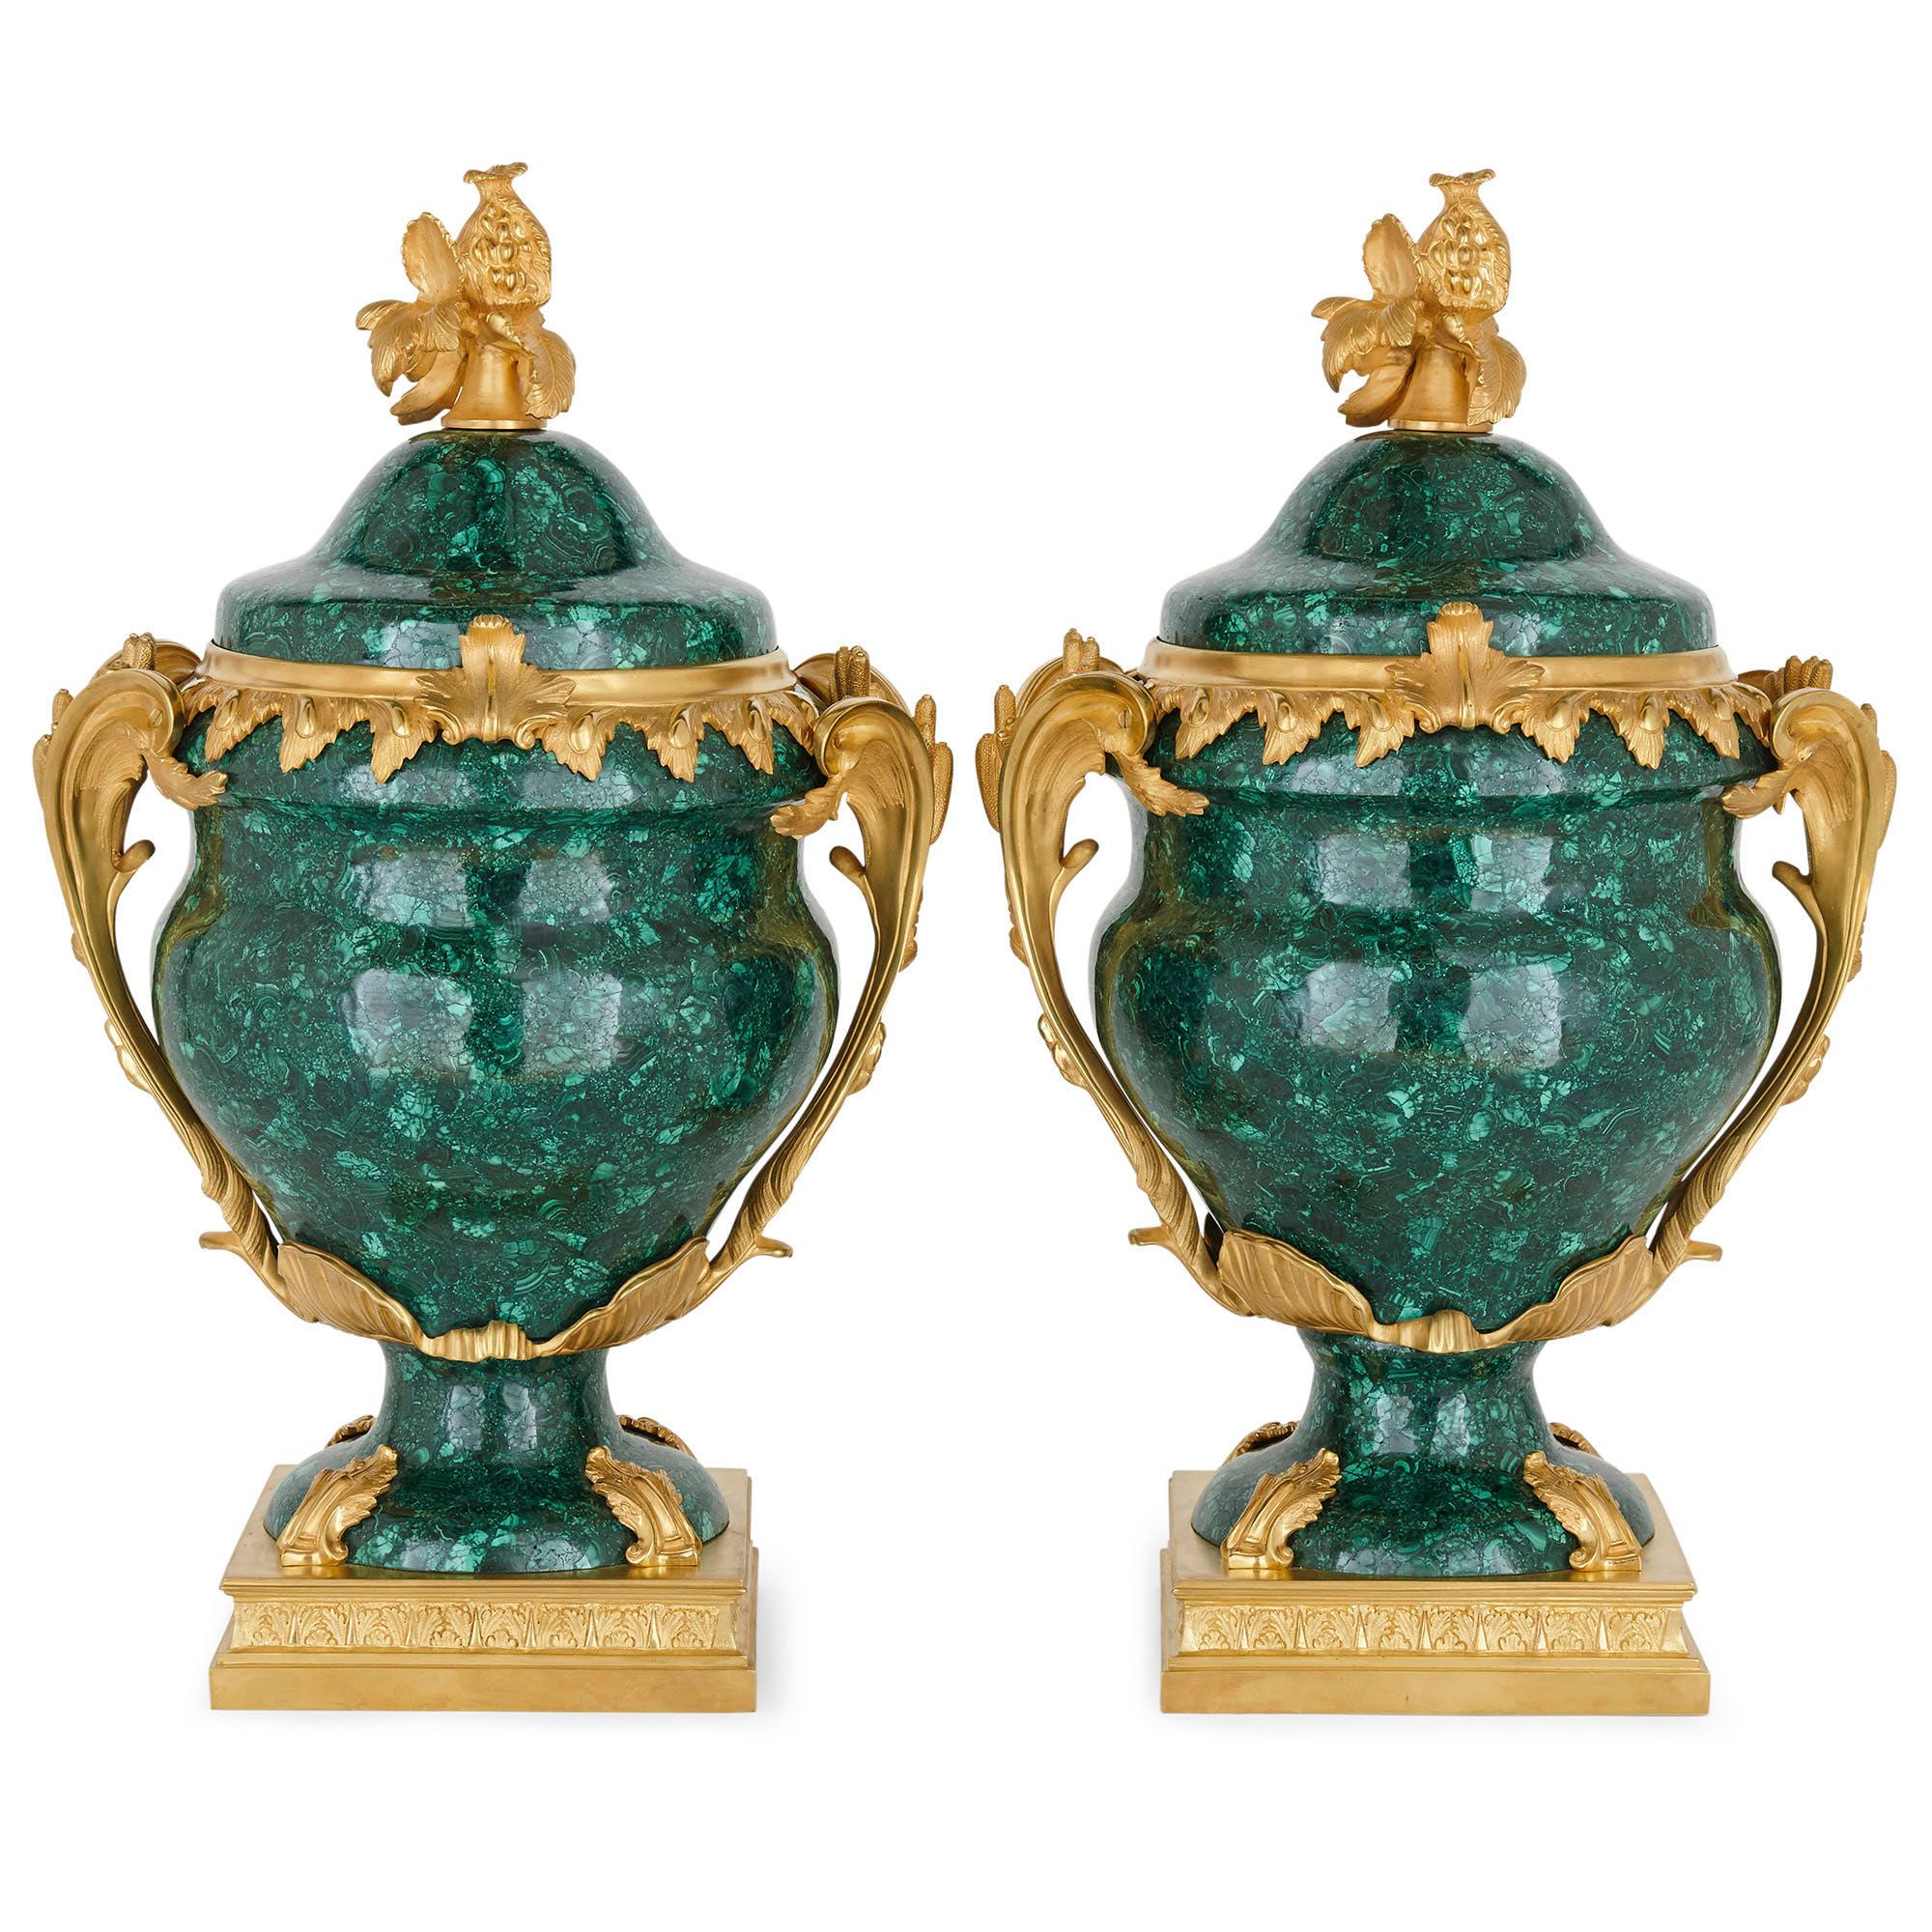 Pair of French Malachite and gilt bronze vases
French, 20th century
Measures: Height 63cm, width 40cm, depth 31cm

Each vase in this pair is made of gilt bronze mounted malachite, designed in the distinct Neoclassical Louis XVI style. The vases